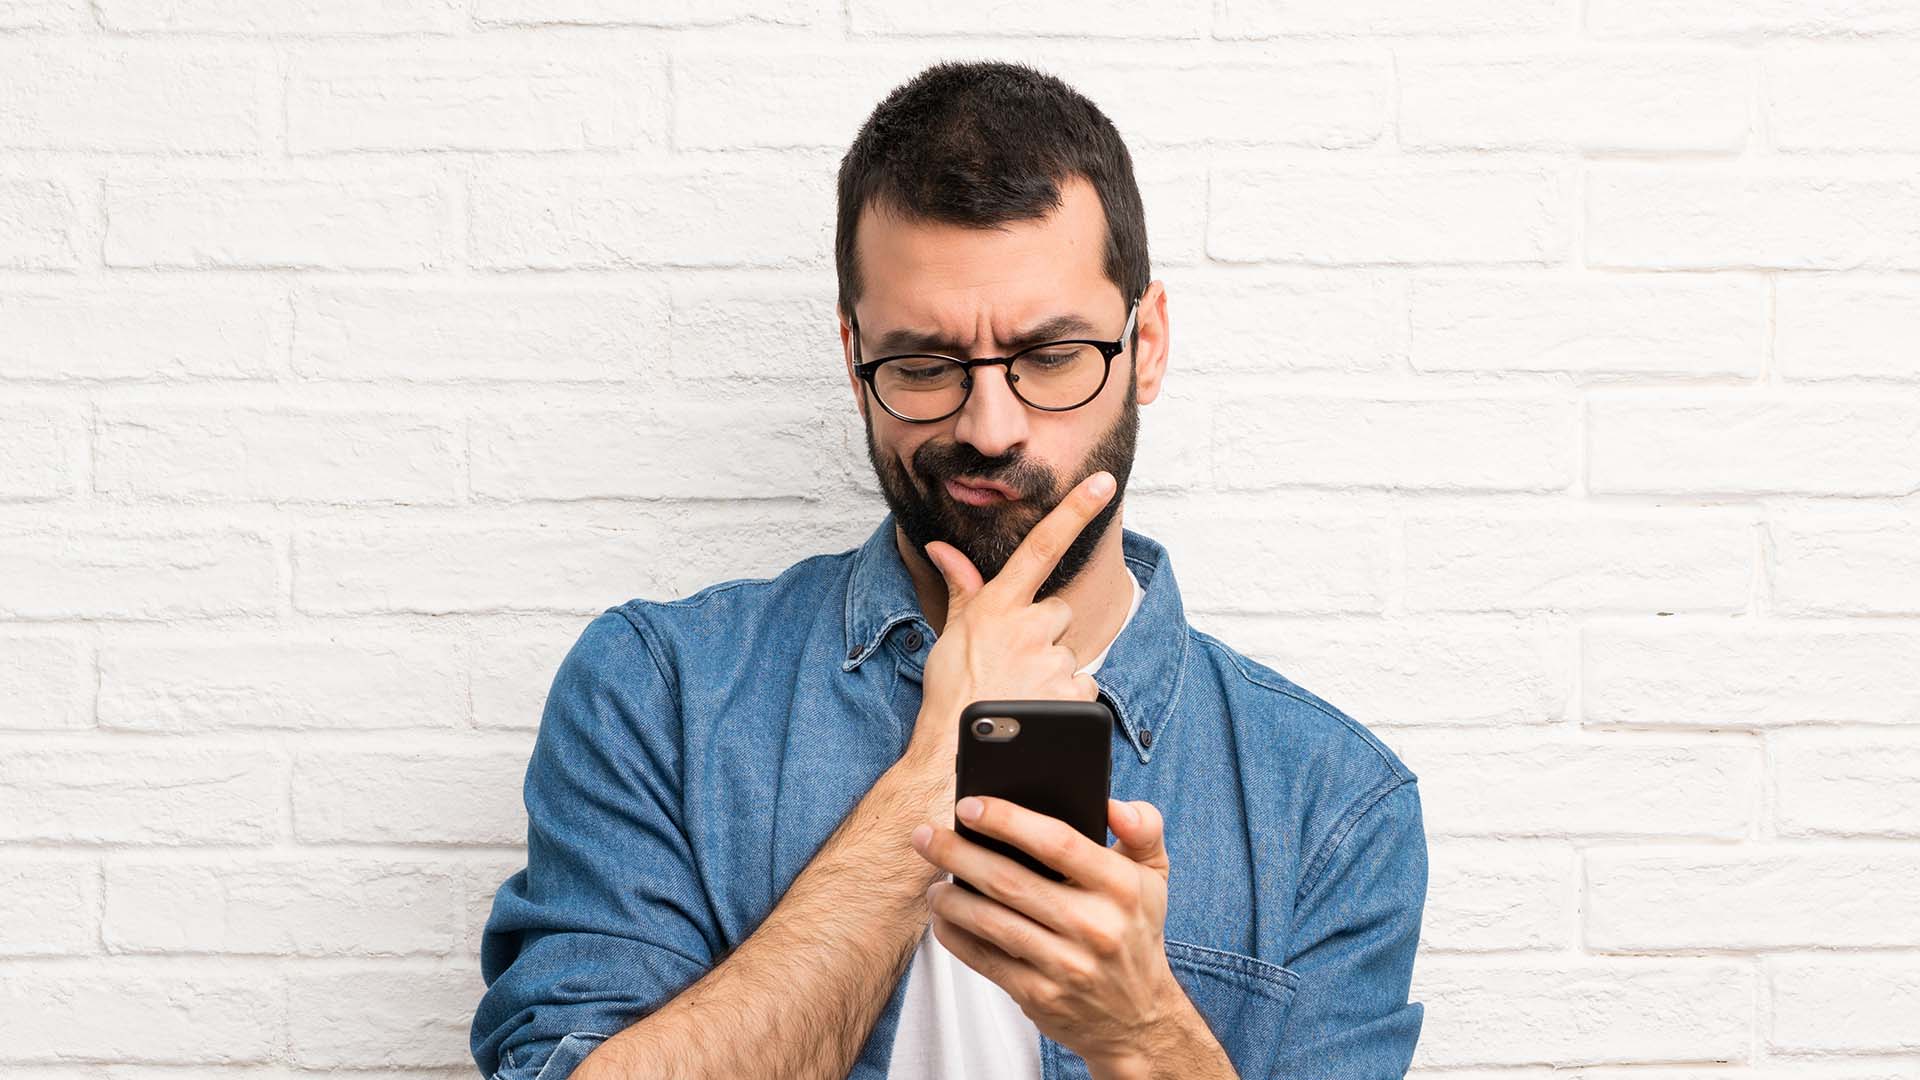 Brunette bearded man wearing glasses and jean shirt, rubbing his chin while looking at his phone. White brick background.